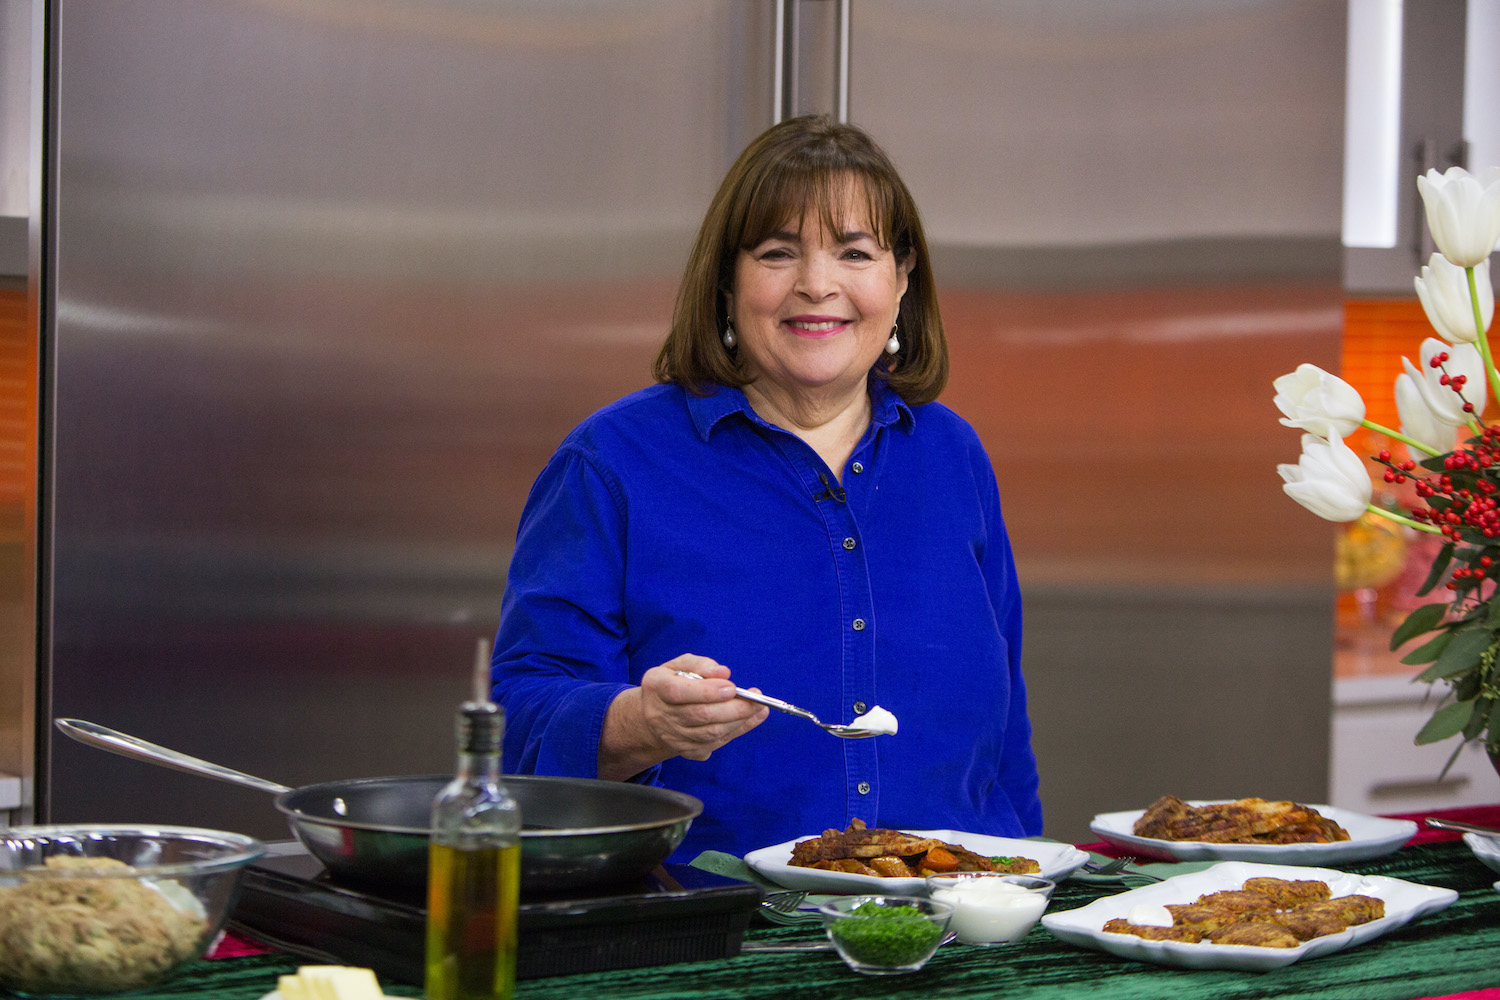 Ina Garten on the Today show in 2017